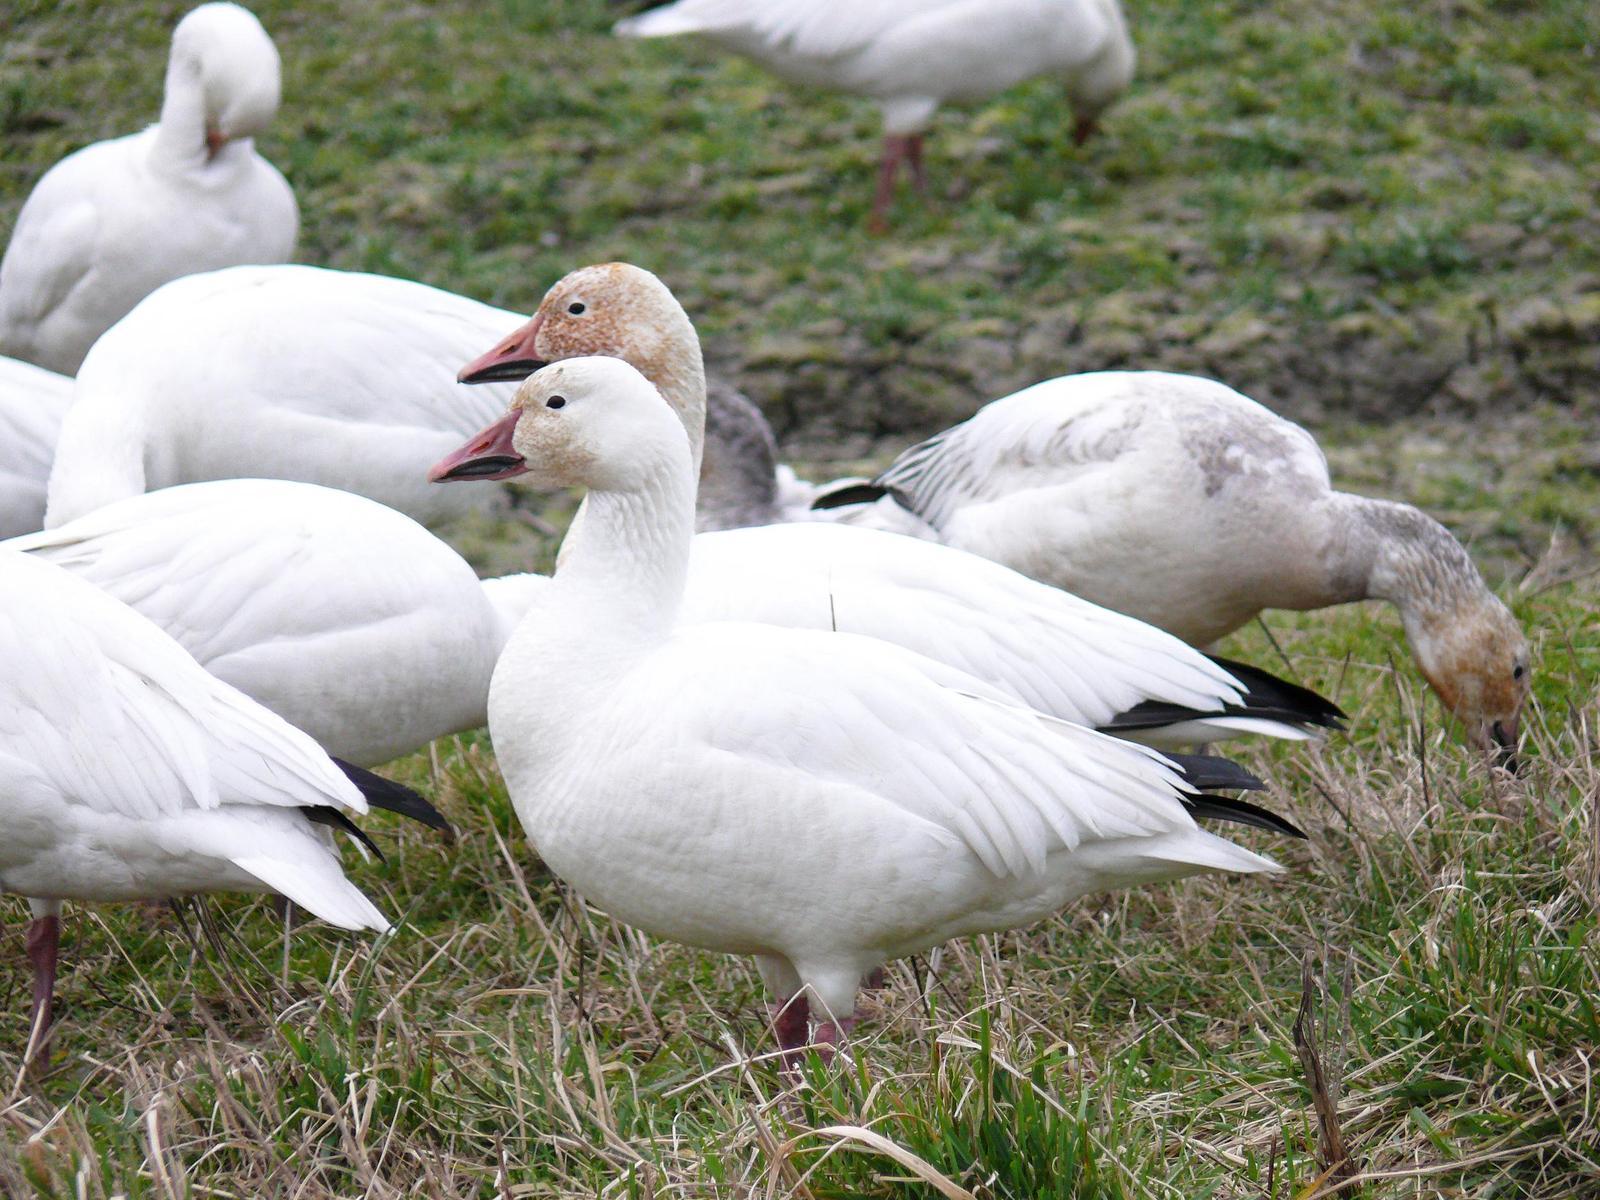 Snow Goose Photo by Steven Mlodinow